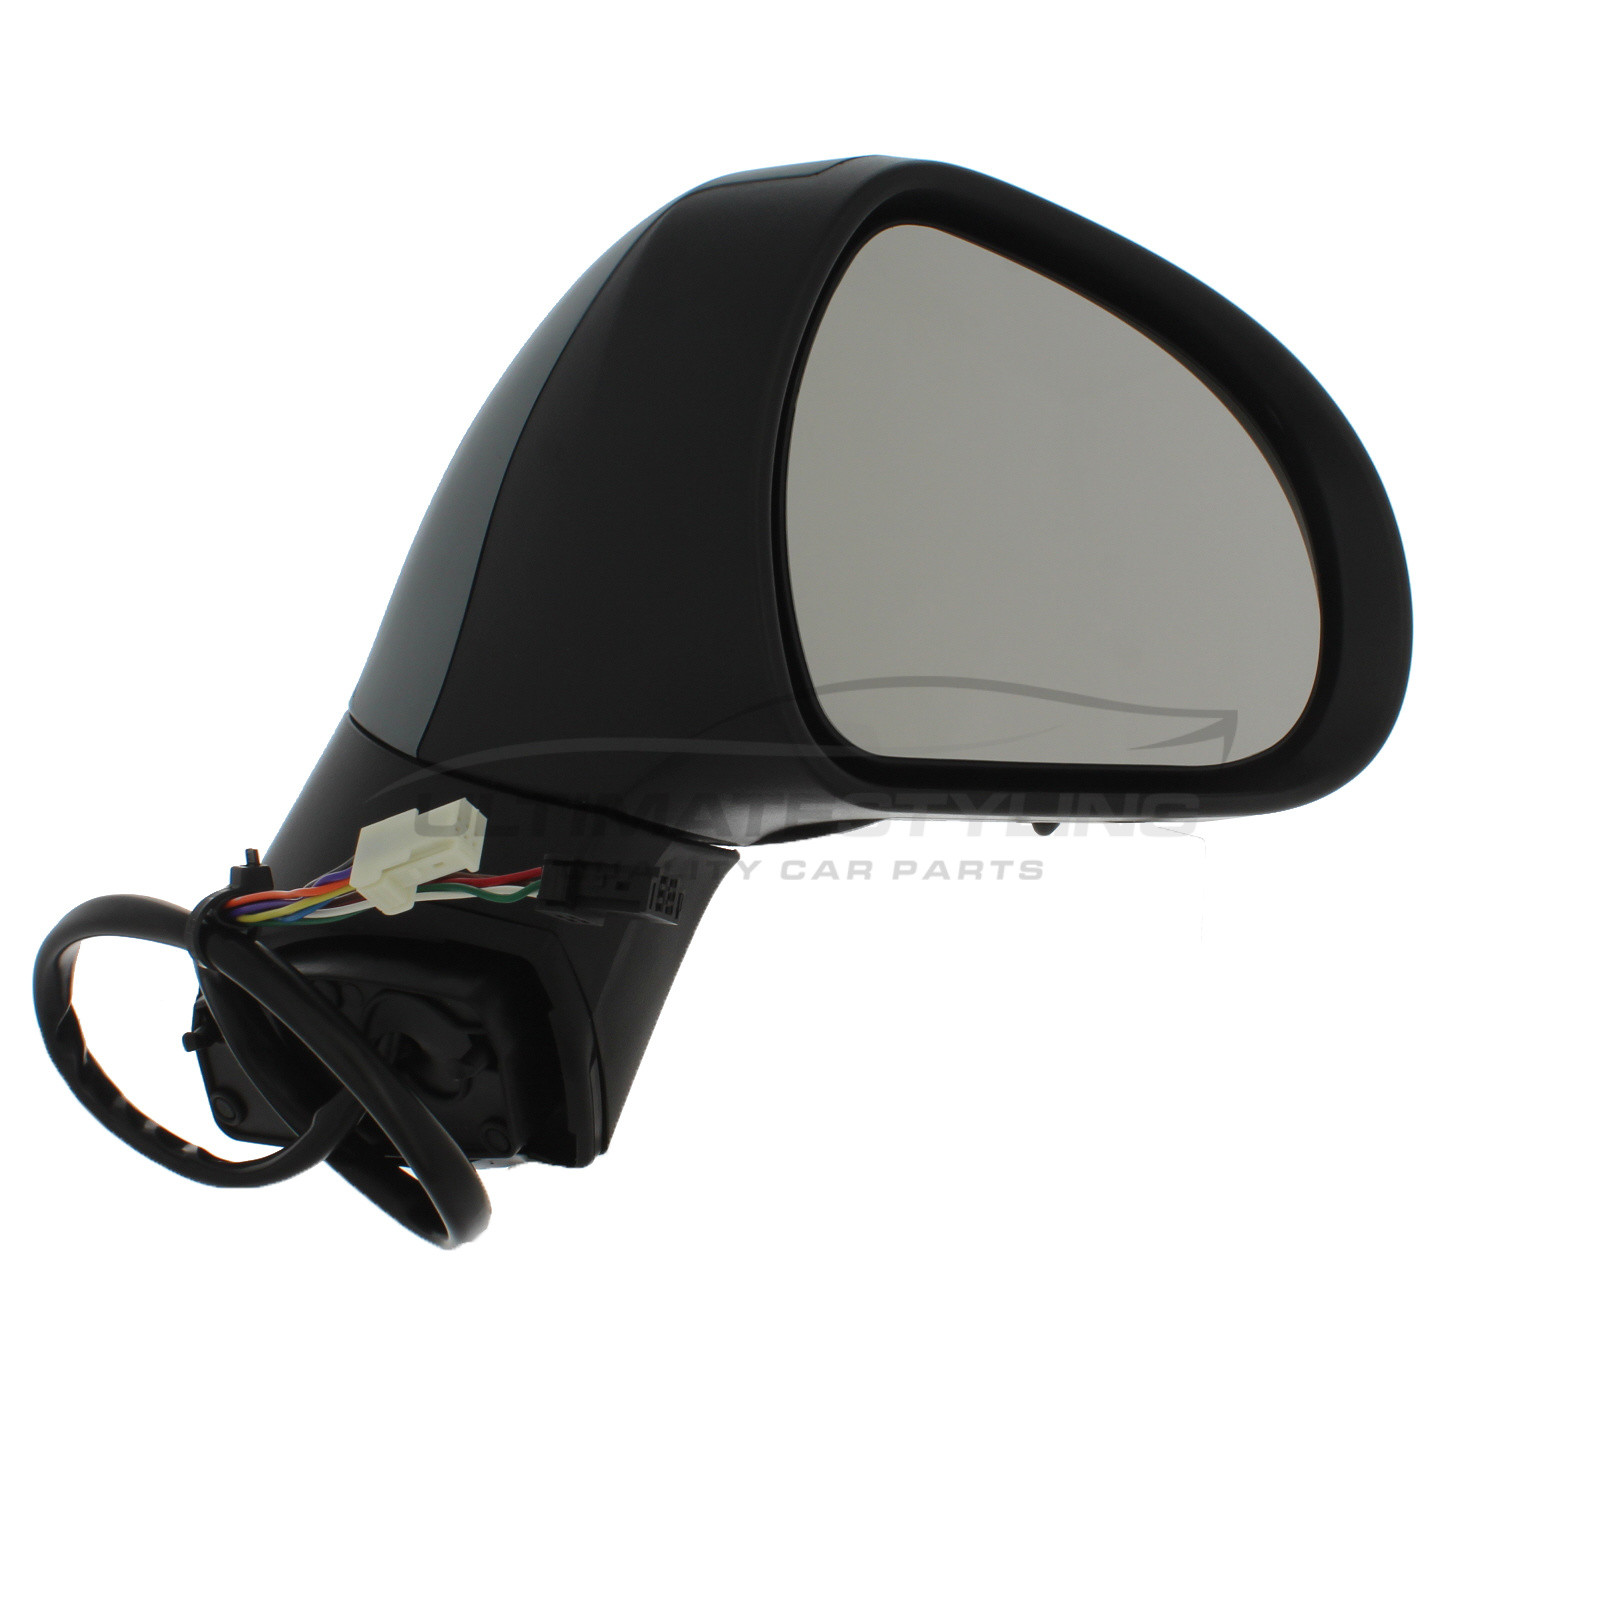 PEUGEOT 207 06-12 ELECTRIC WING MIRROR LEFT PAINTED ANY PEUGEOT COLOUR 